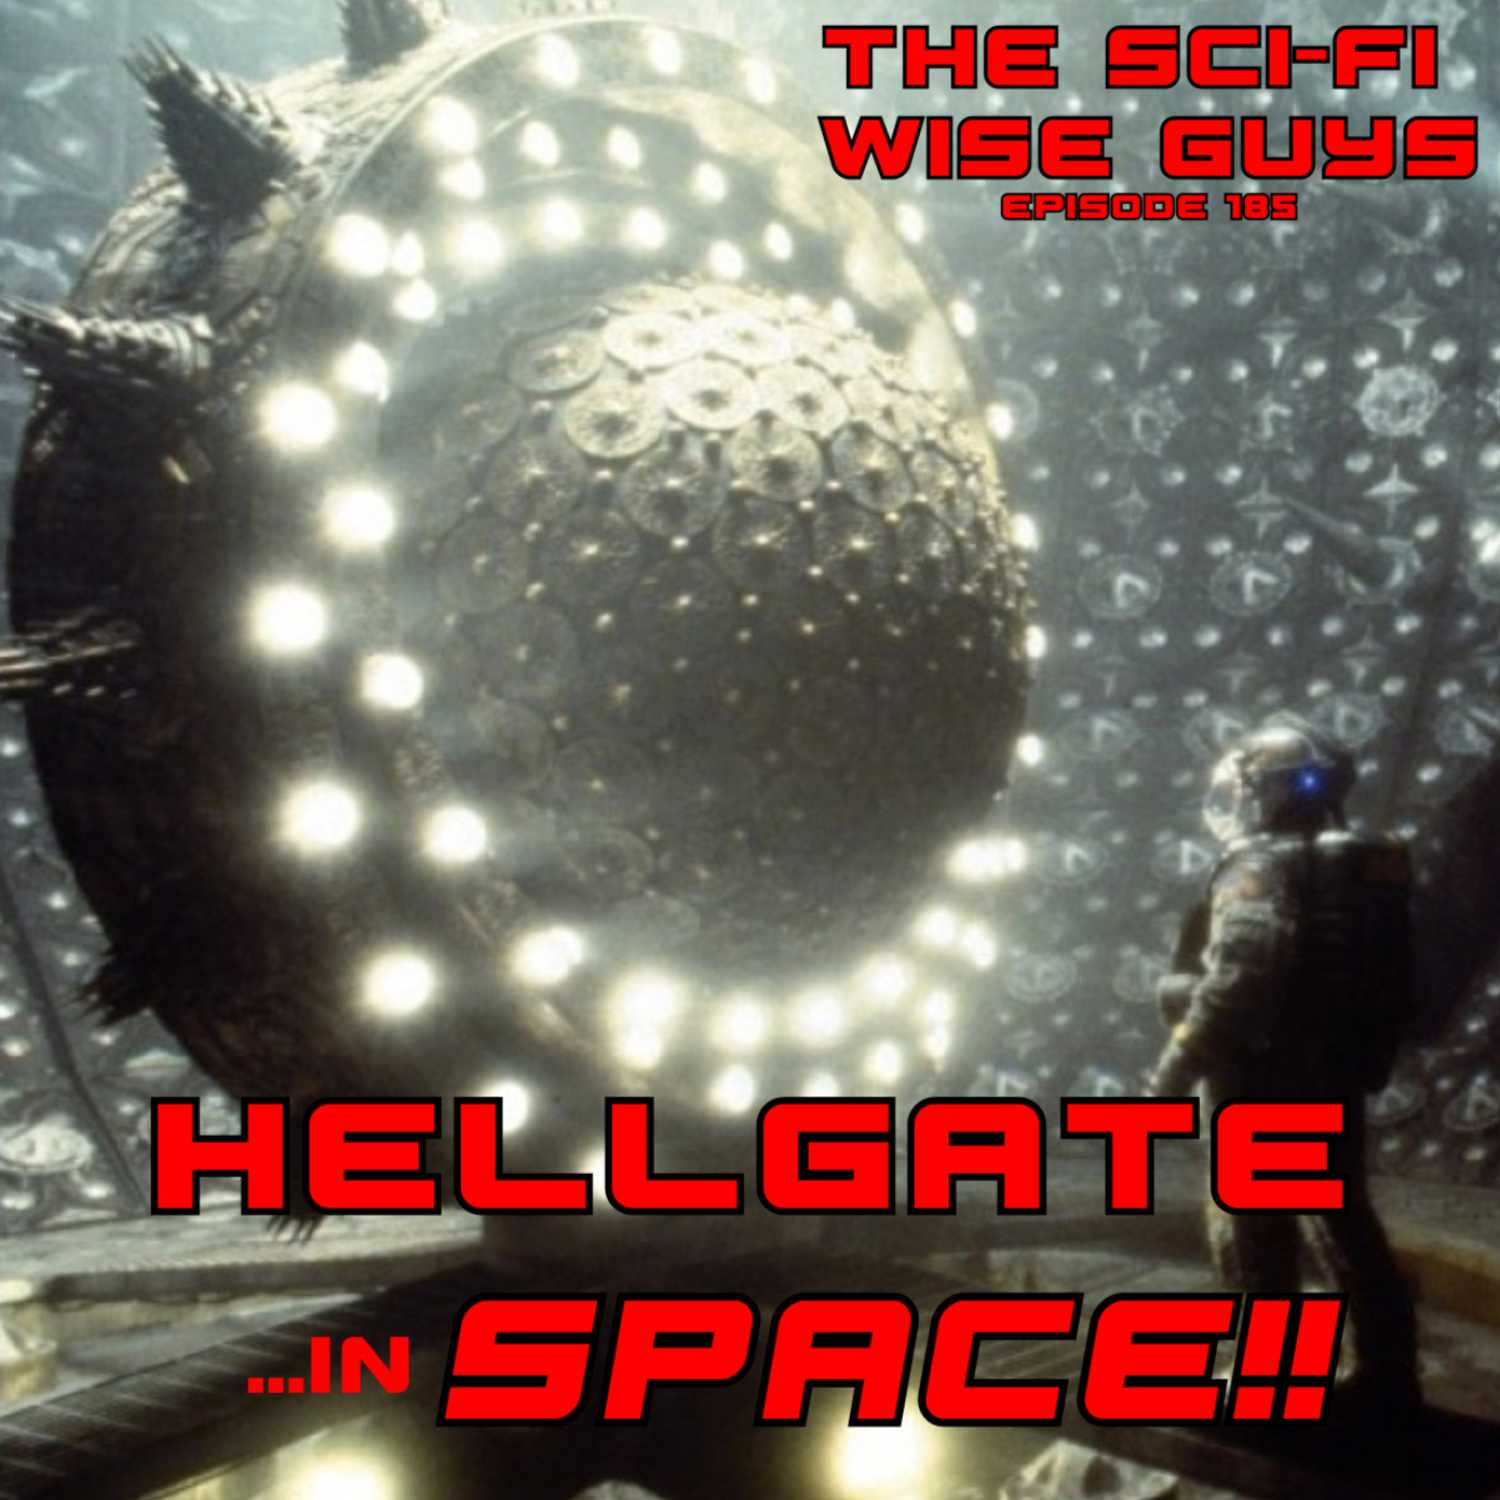 Hellgate ...in SPACE!! (Event Horizon)